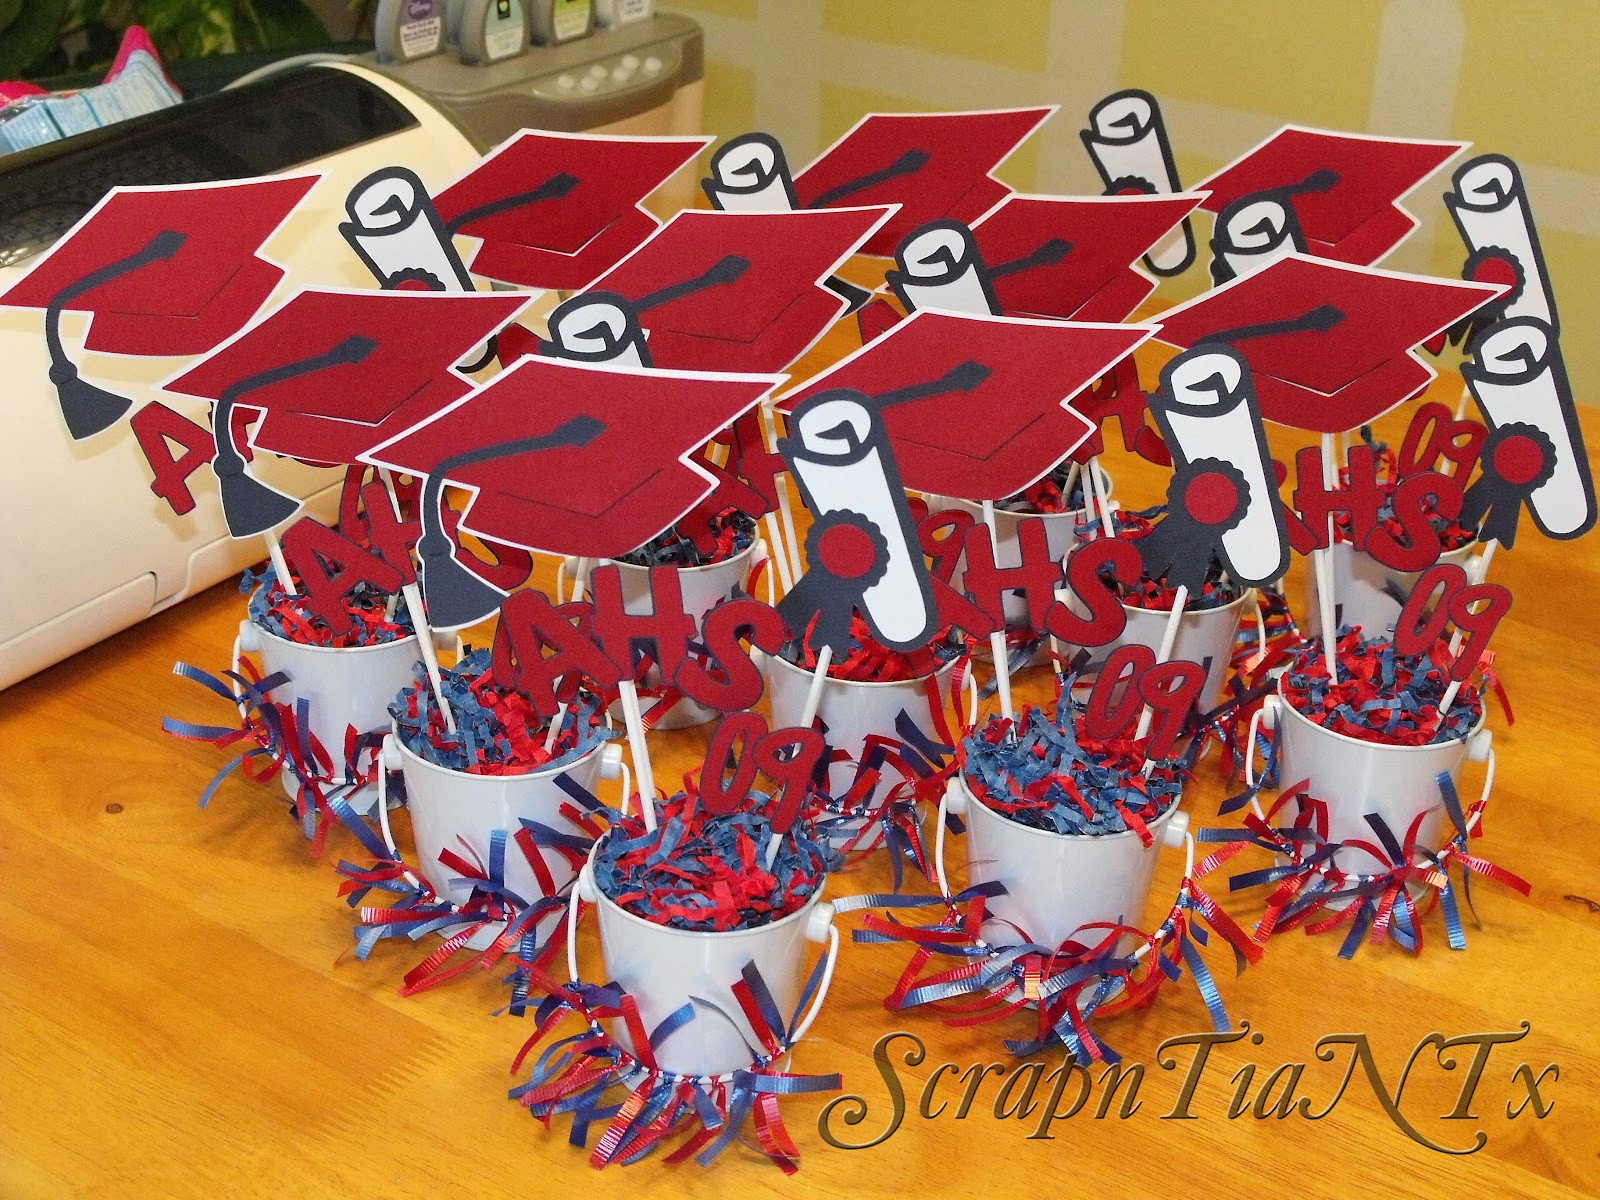 Ideas For Table Centerpieces For Graduation Party
 A ScrapN Tia N Tx Graduation Centerpieces